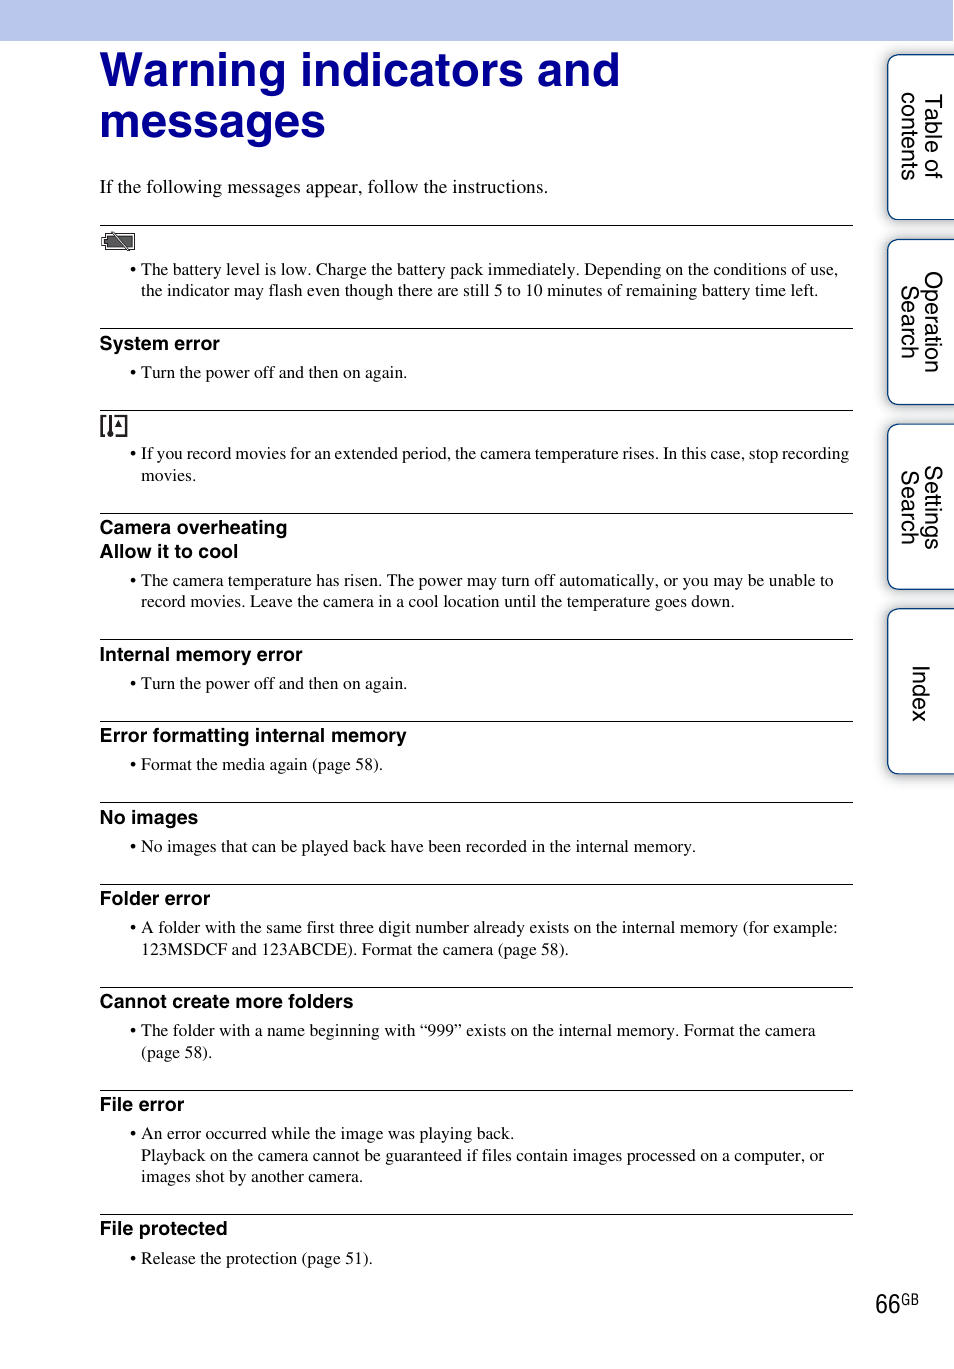 Warning indicators and messages | Sony bloggie MHS-TS20К User Manual | Page 66 / 73